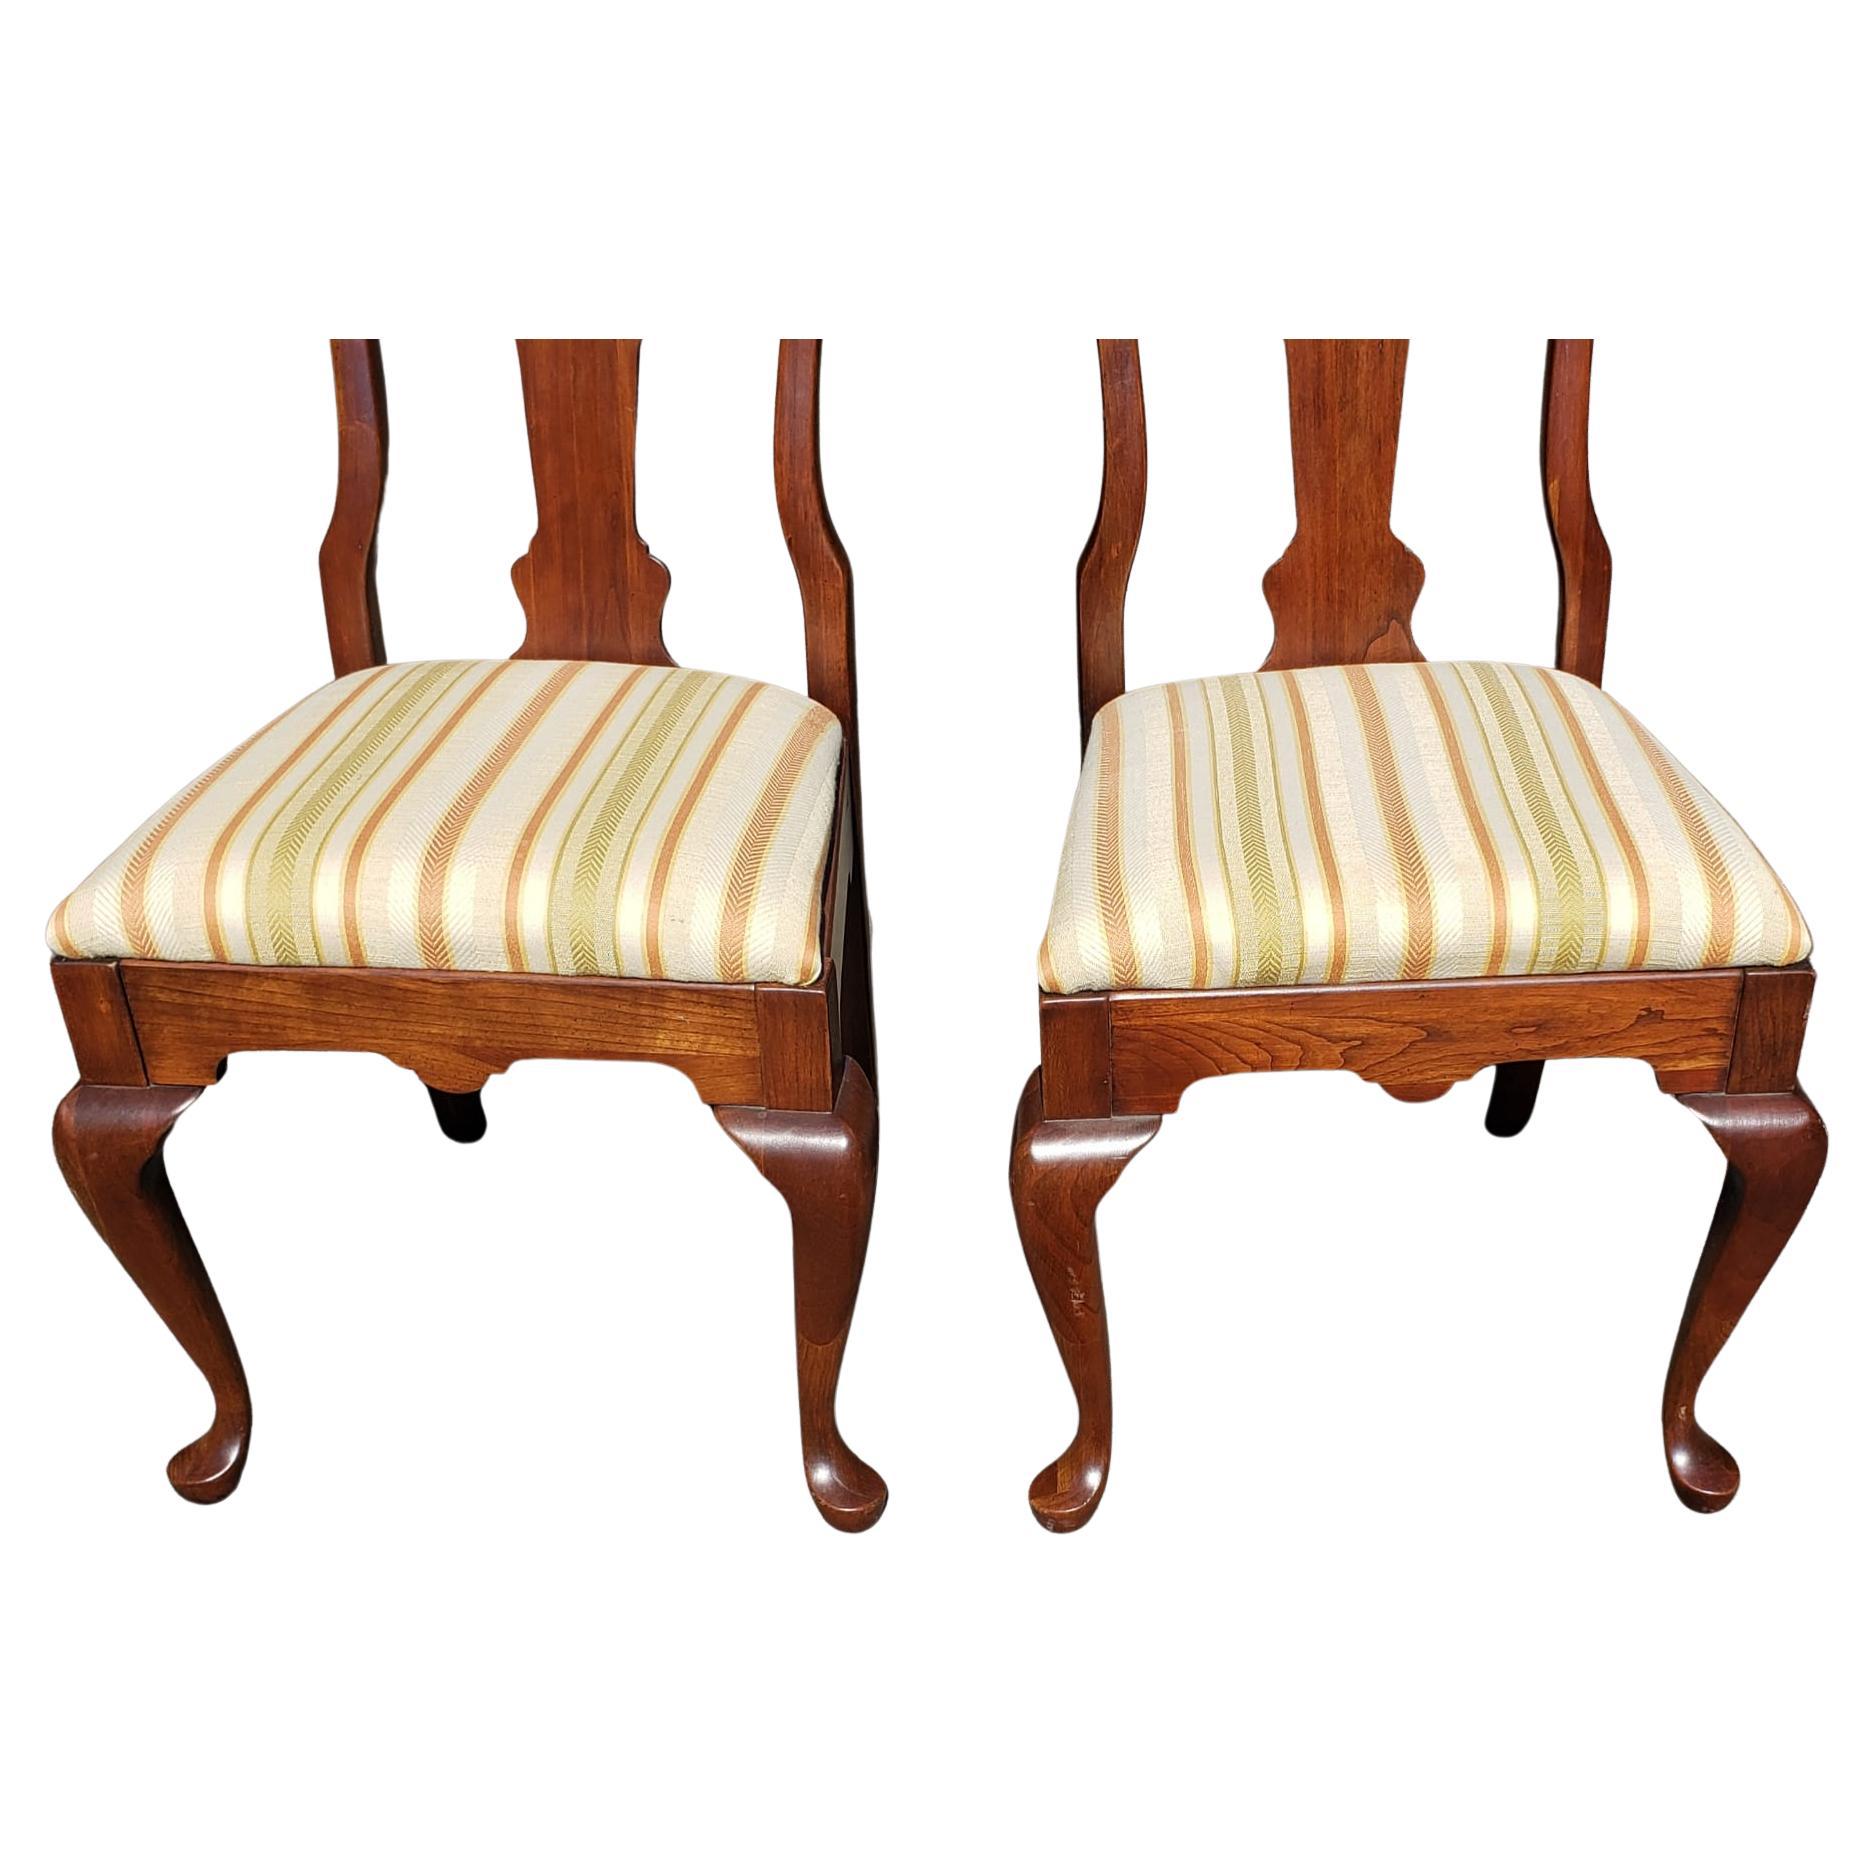 Upholstery Pair 20th C. Pennsylvania House Cherry Upholstered Seat Queen Anne Side Chairs